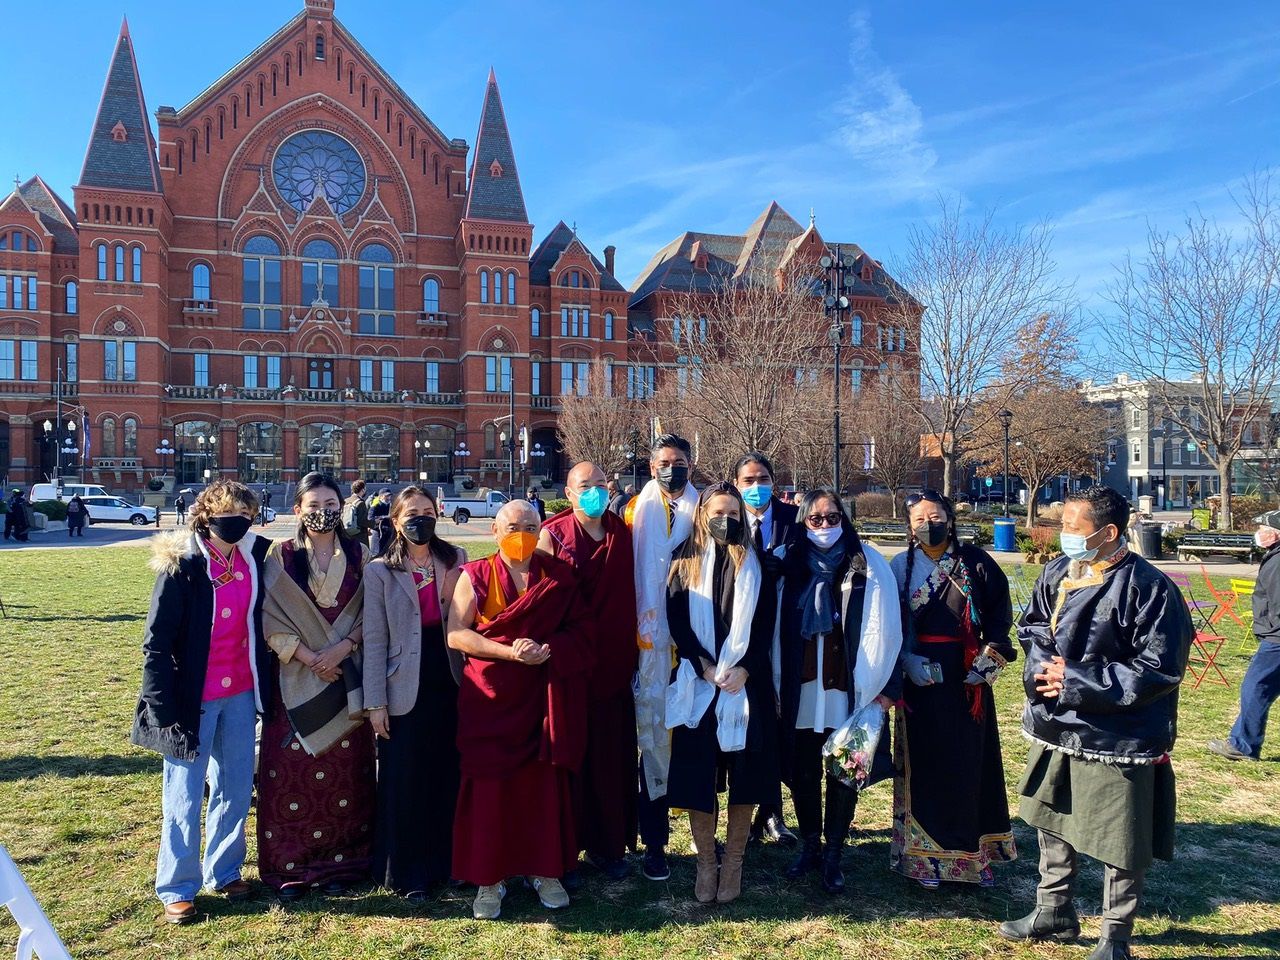 Aftab Pureval surrounded by family and a group from Tibet during his swearing-in ceremony at Washington Park in Cincinnati. (Casey Weldon/Spectrum News 1)